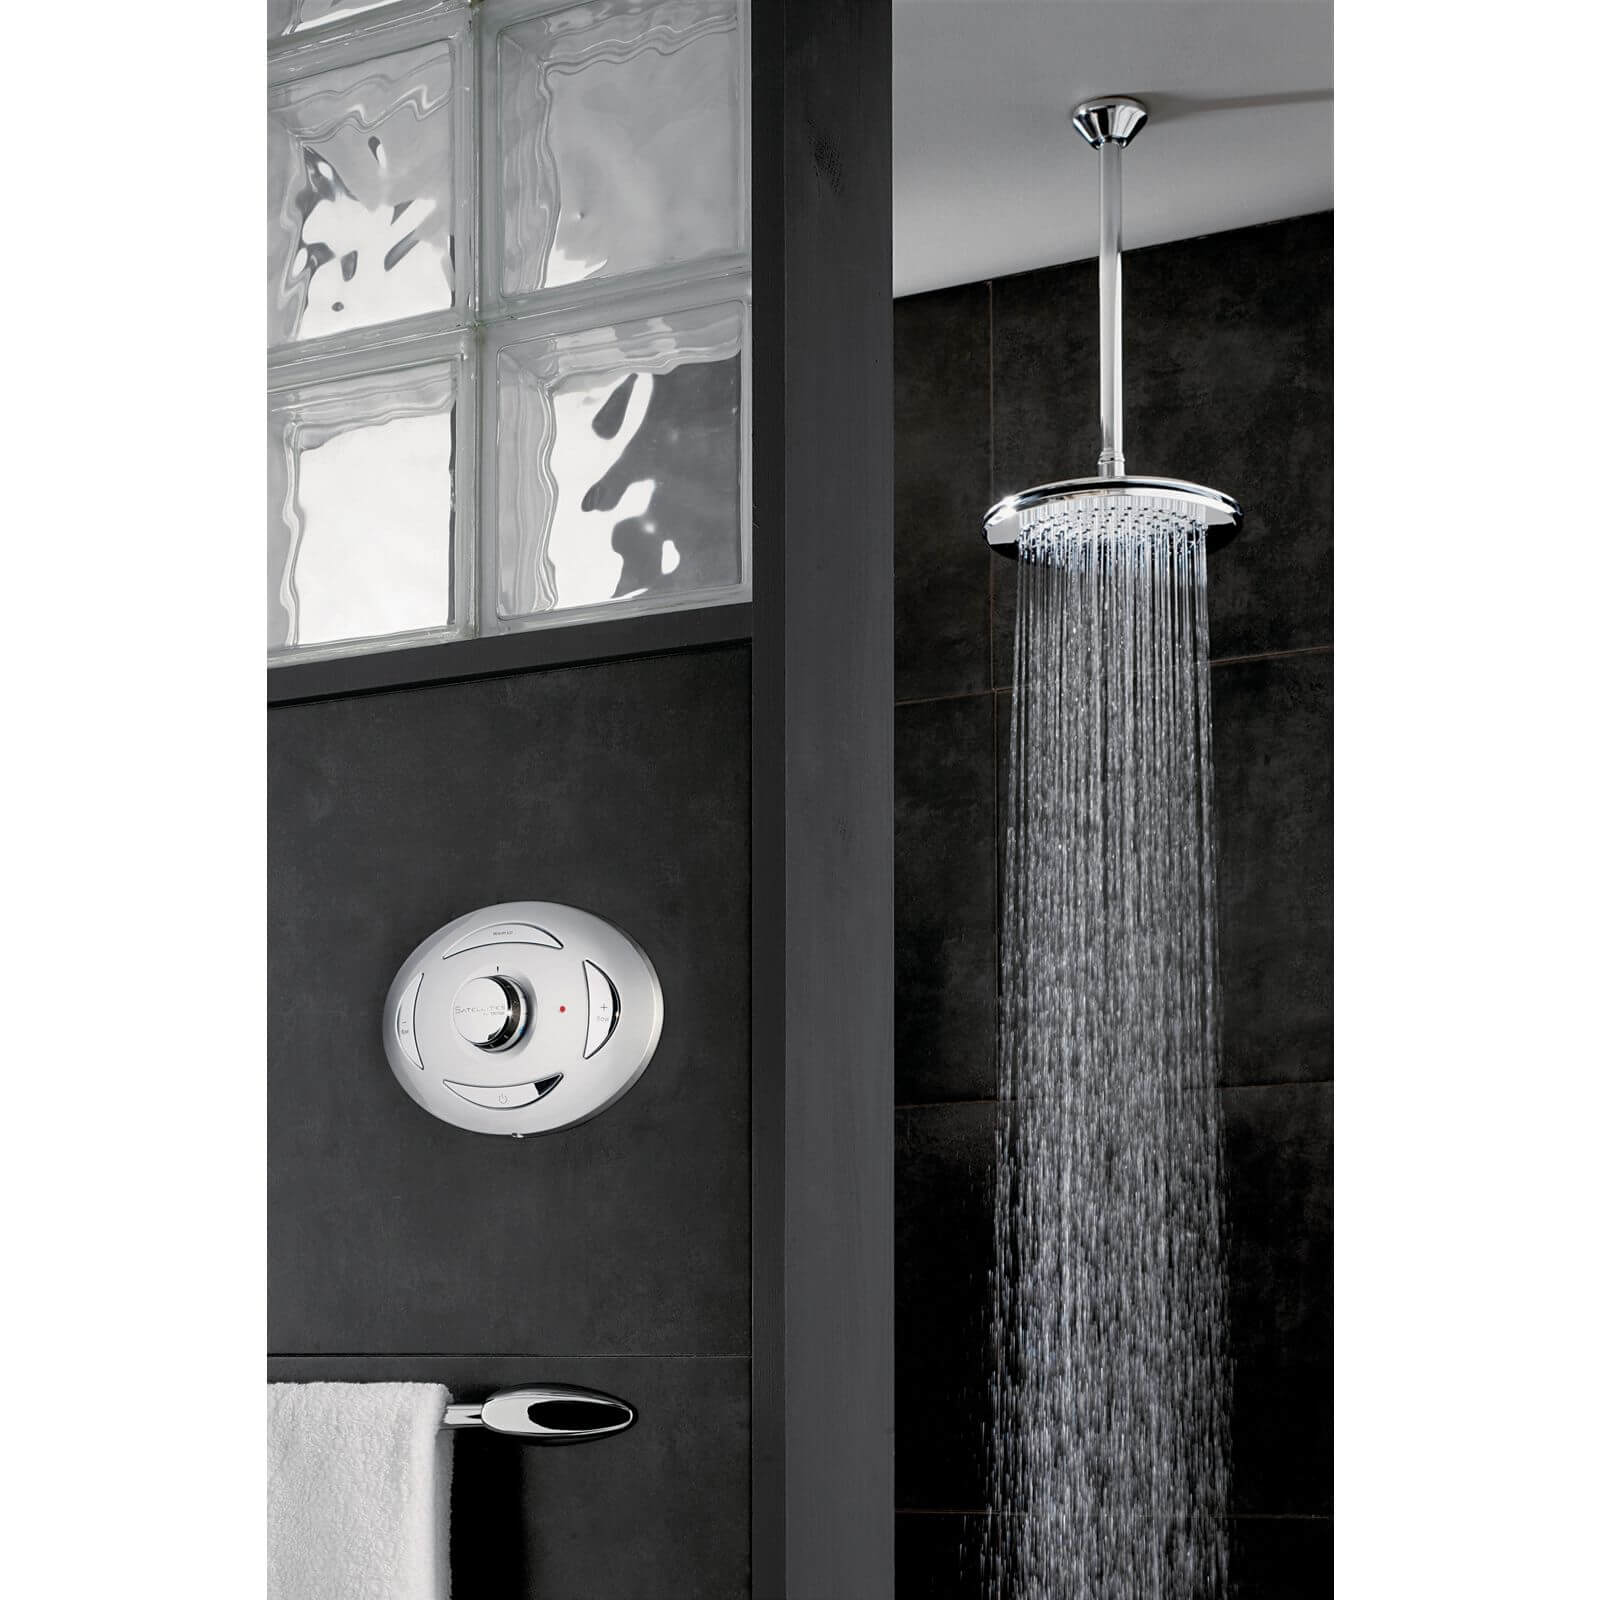 Photo of Triton Digital Mixer Shower With Fixed Showerhead - Unpumped